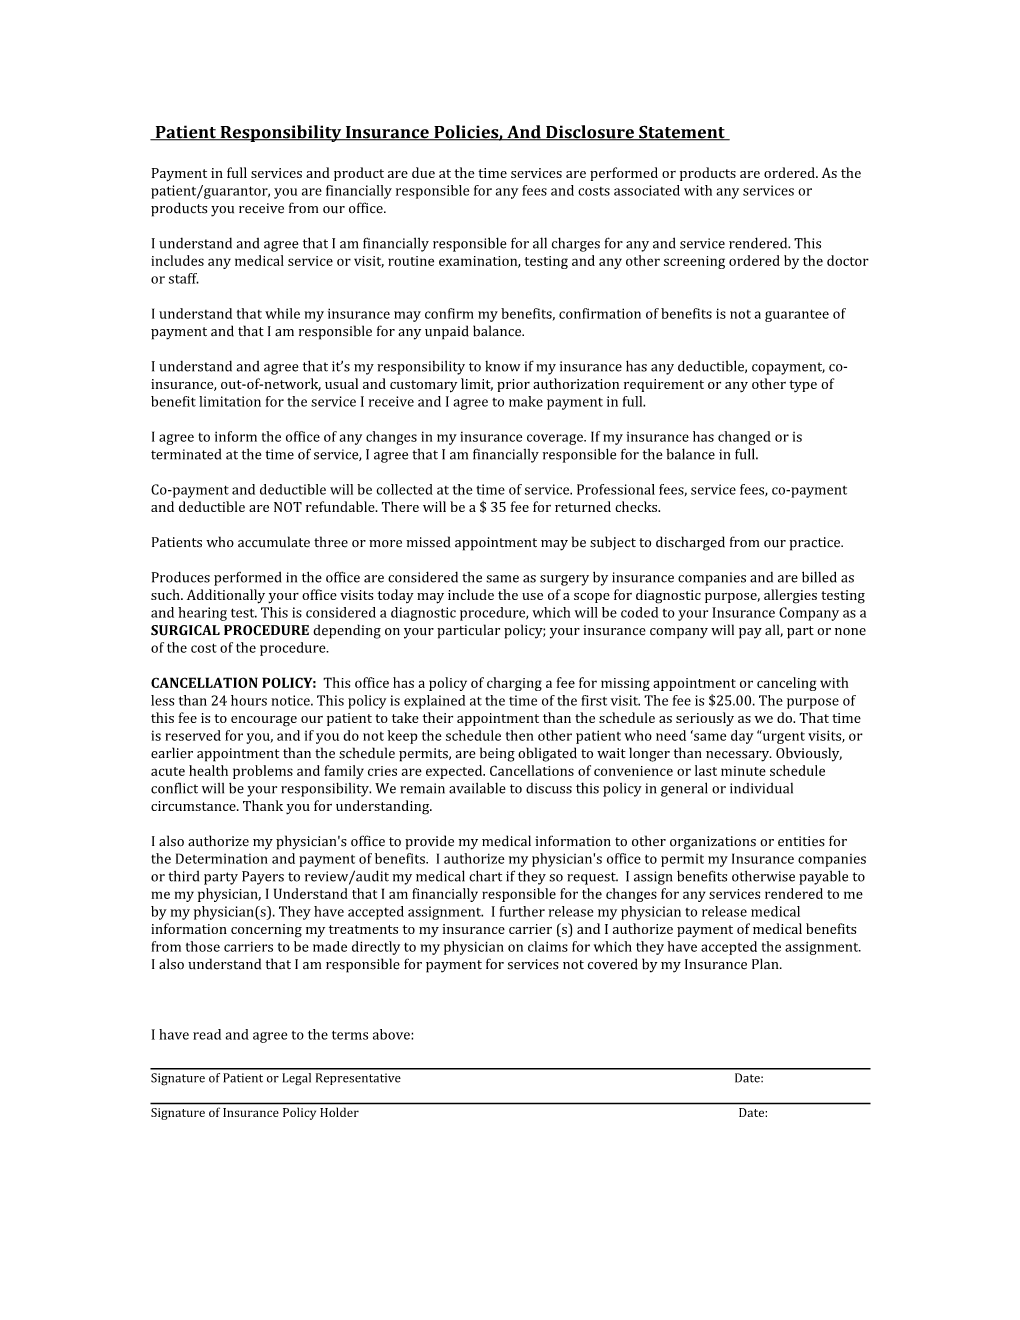 Patient Responsibility Insurance Policies, and Disclosure Statement